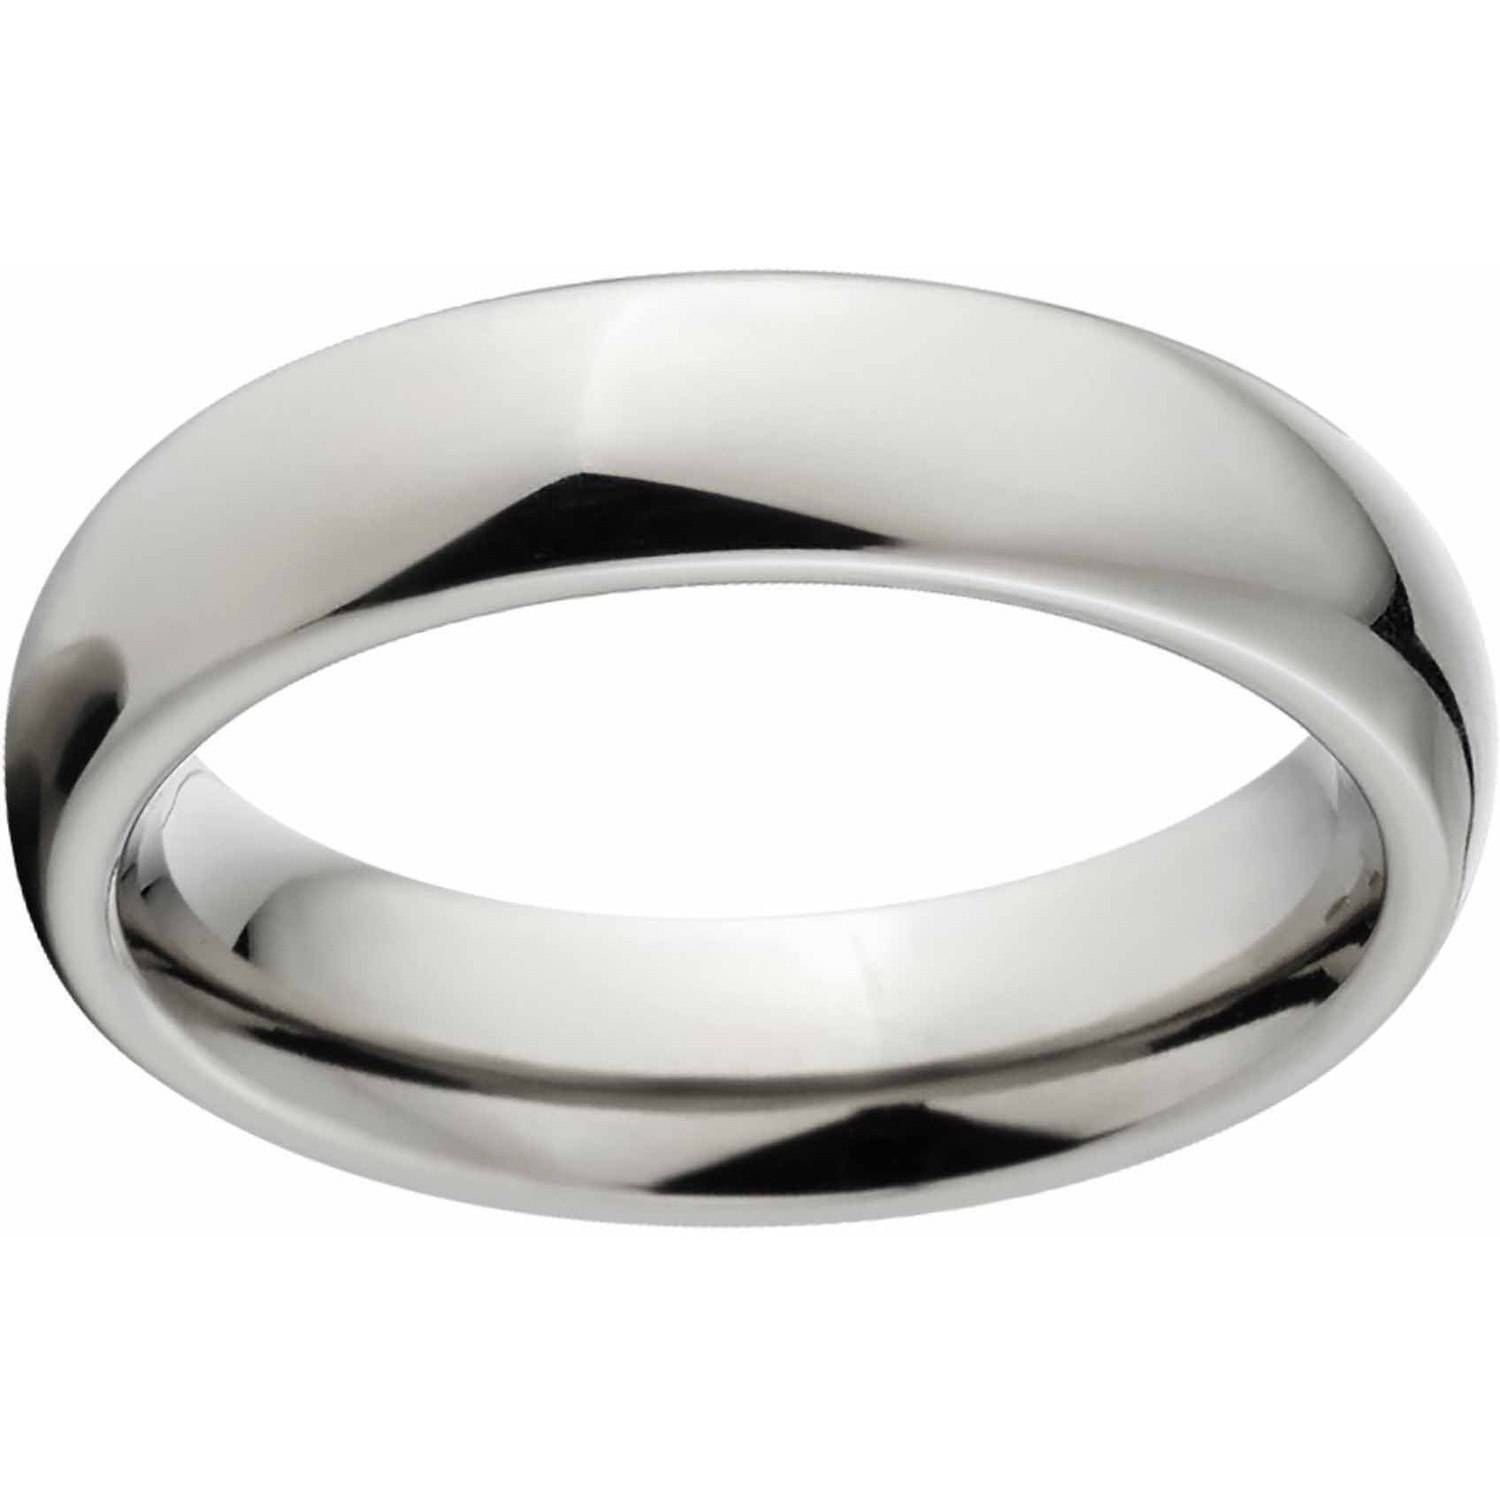 Polished 4mm Titanium Wedding Band With Comfort Fit Design With Walmart Mens Engagement Rings (View 10 of 15)